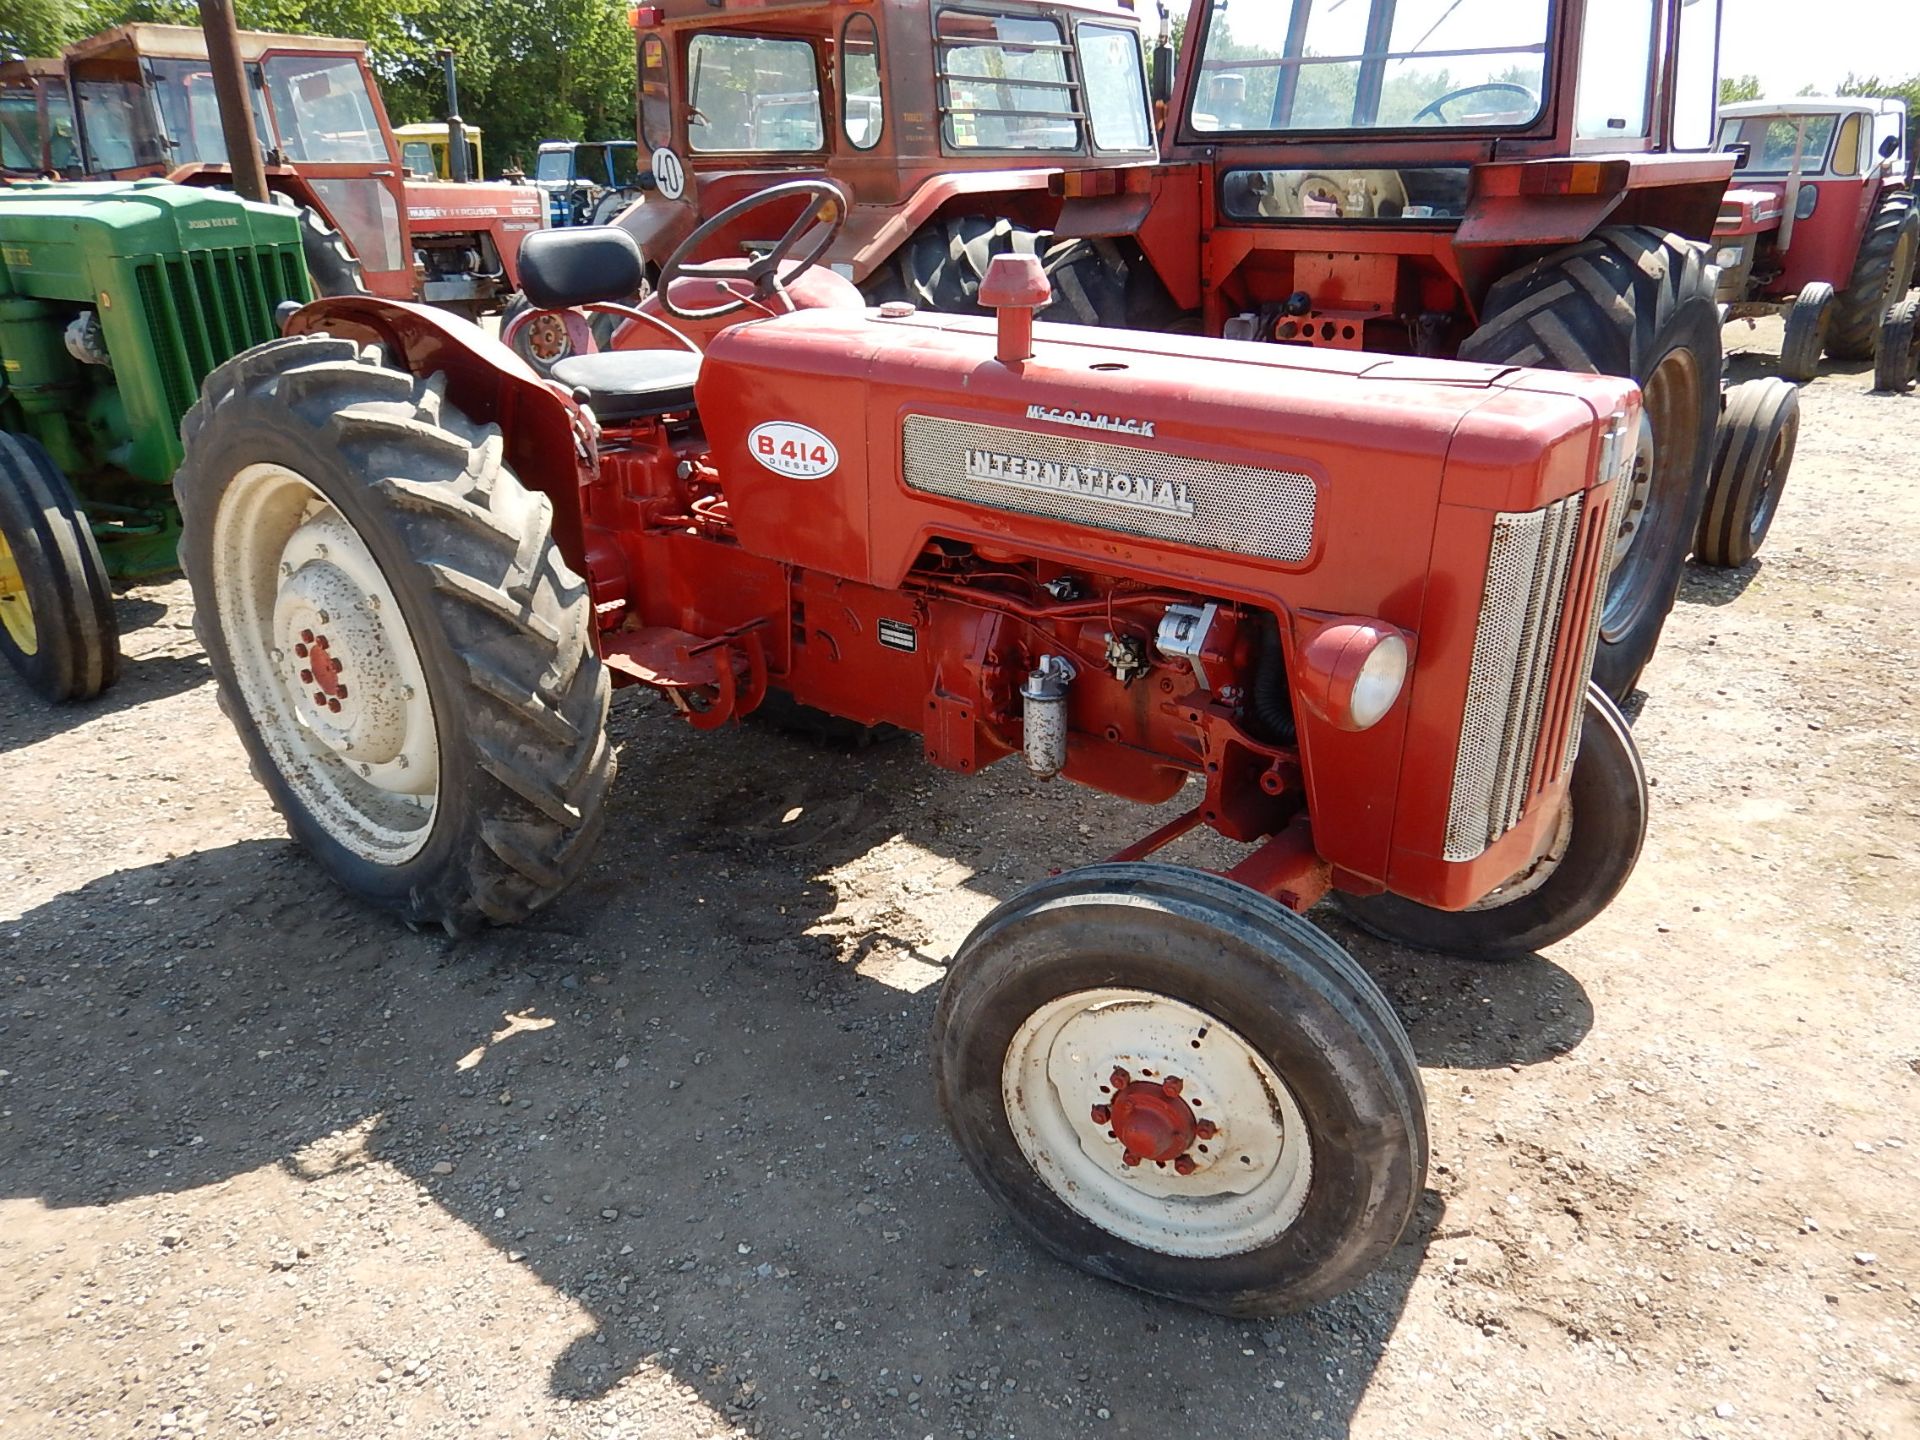 1965 INTERNATIONAL B414 4cylinder diesel TRACTOR Serial No: 28002 A straight example that is